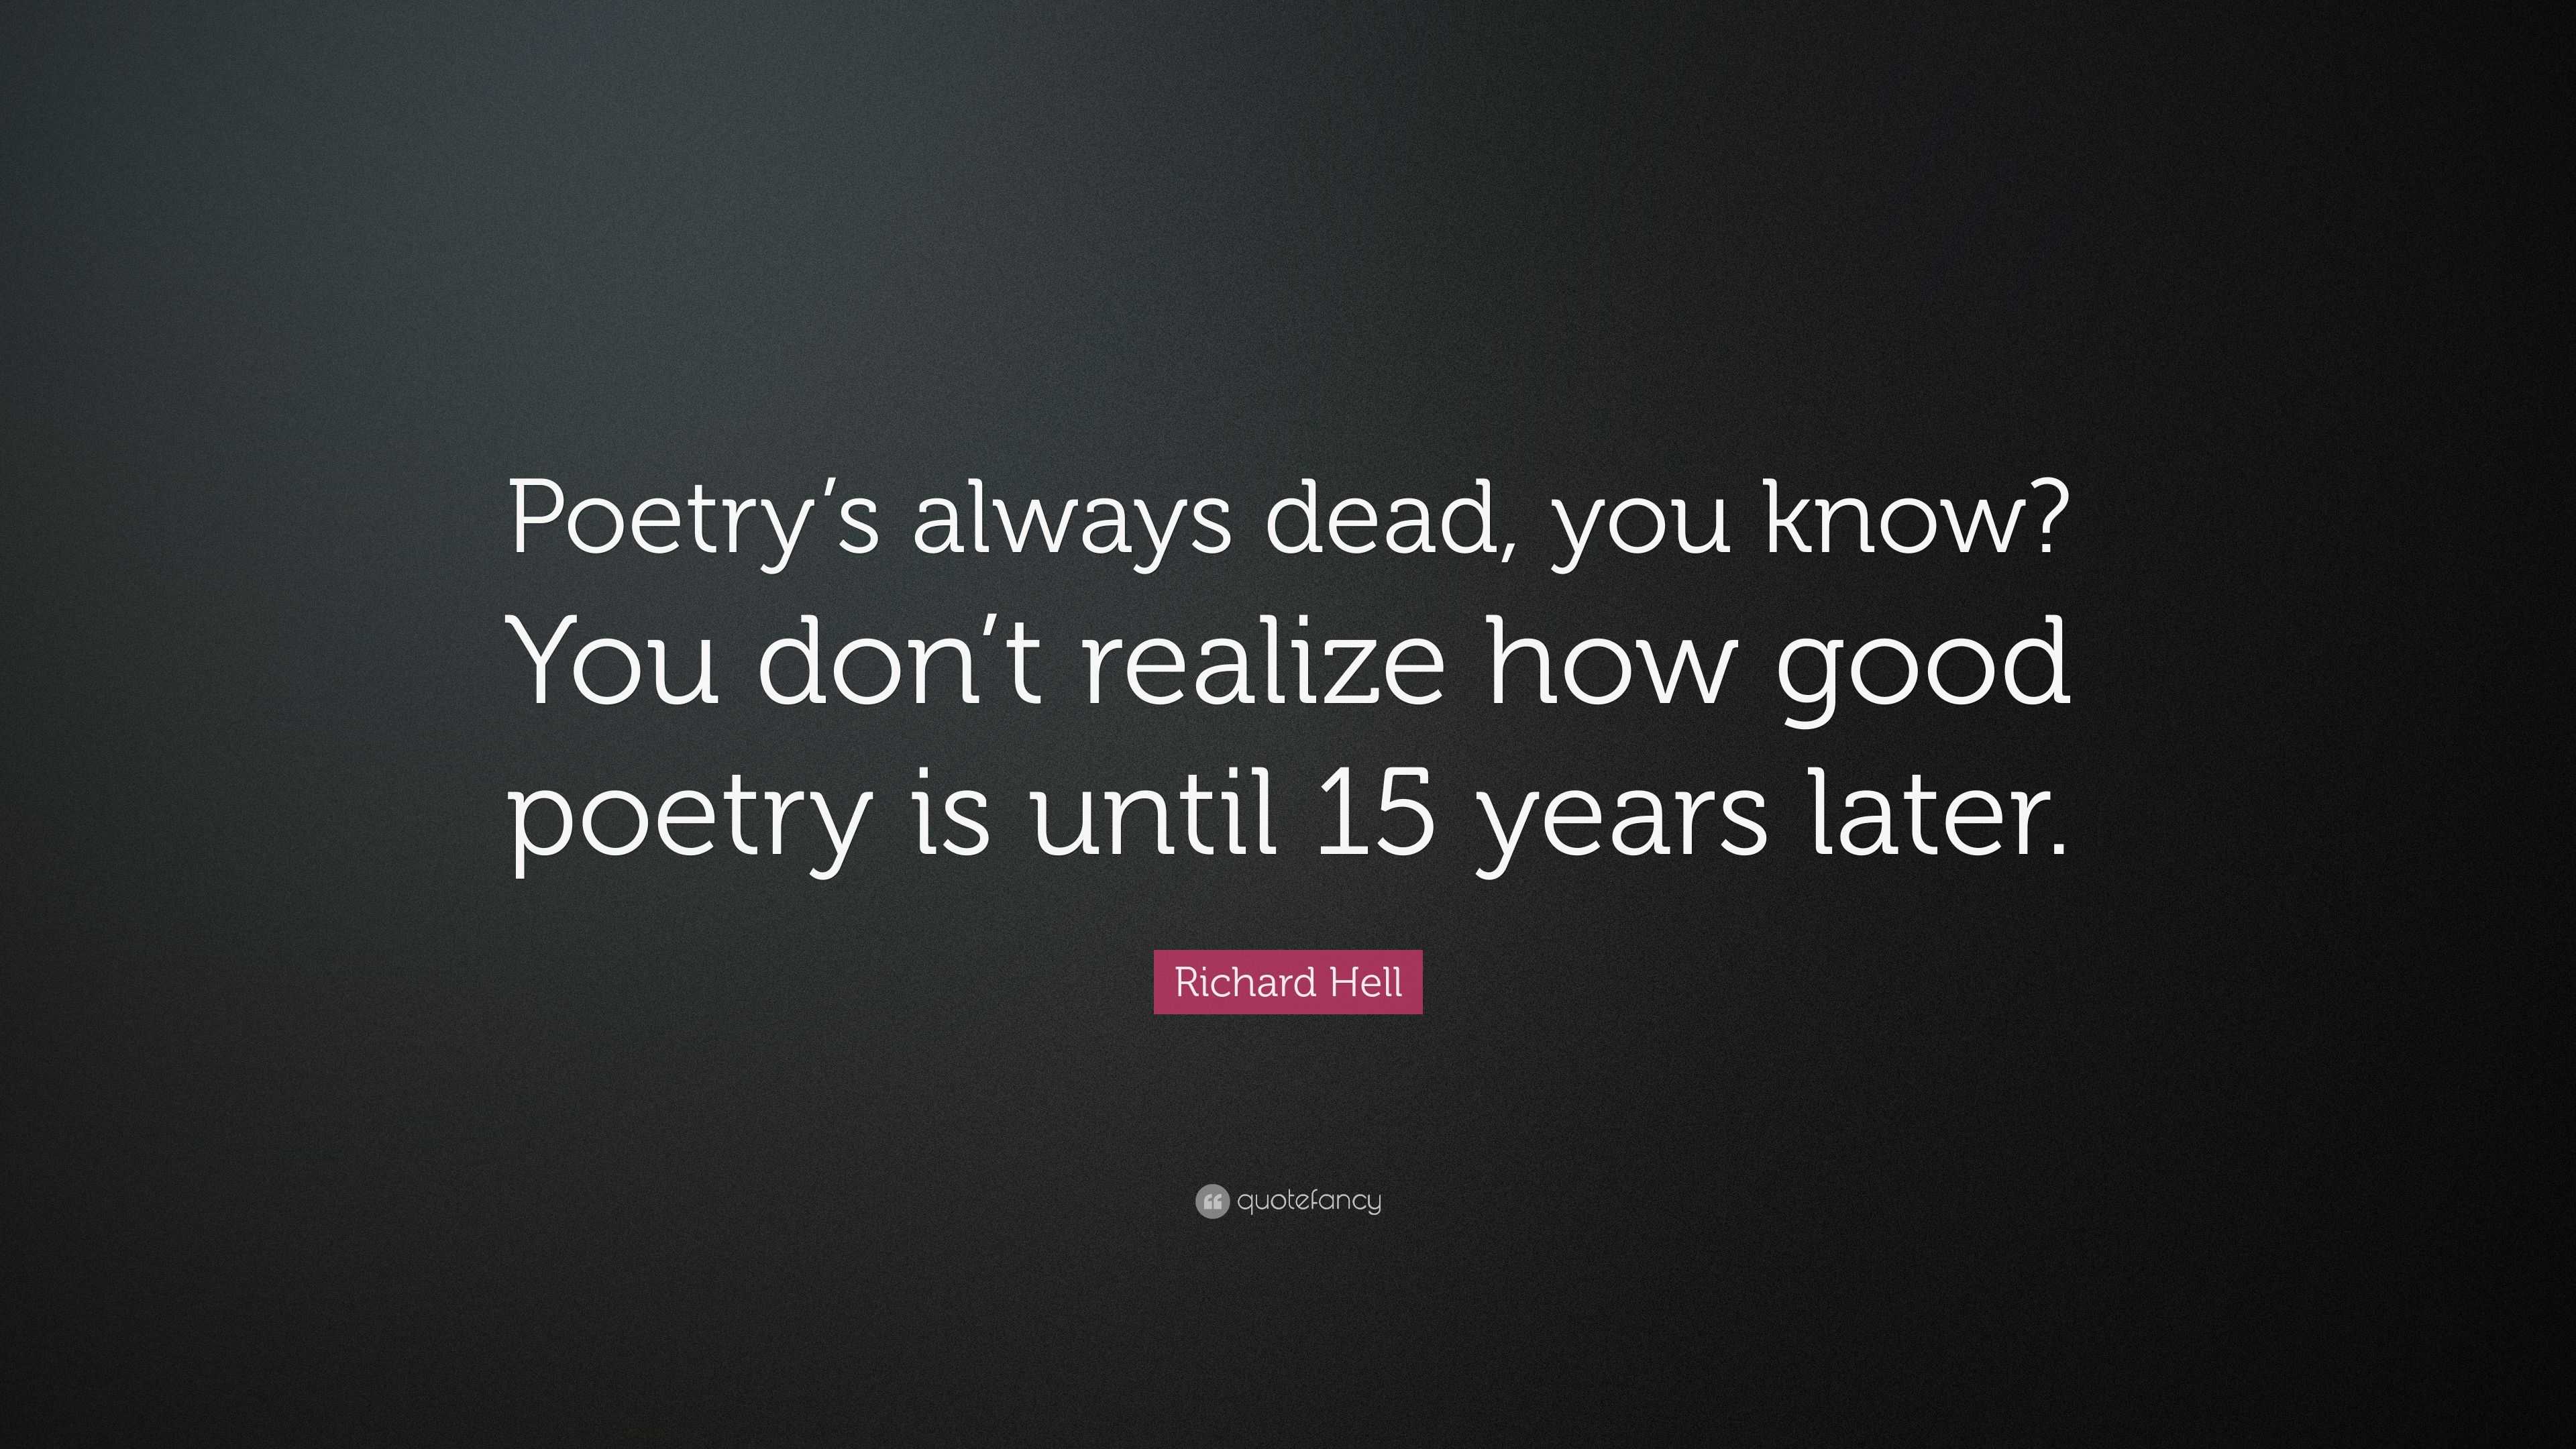 Richard Hell Quote: “Poetry’s always dead, you know? You don’t realize ...